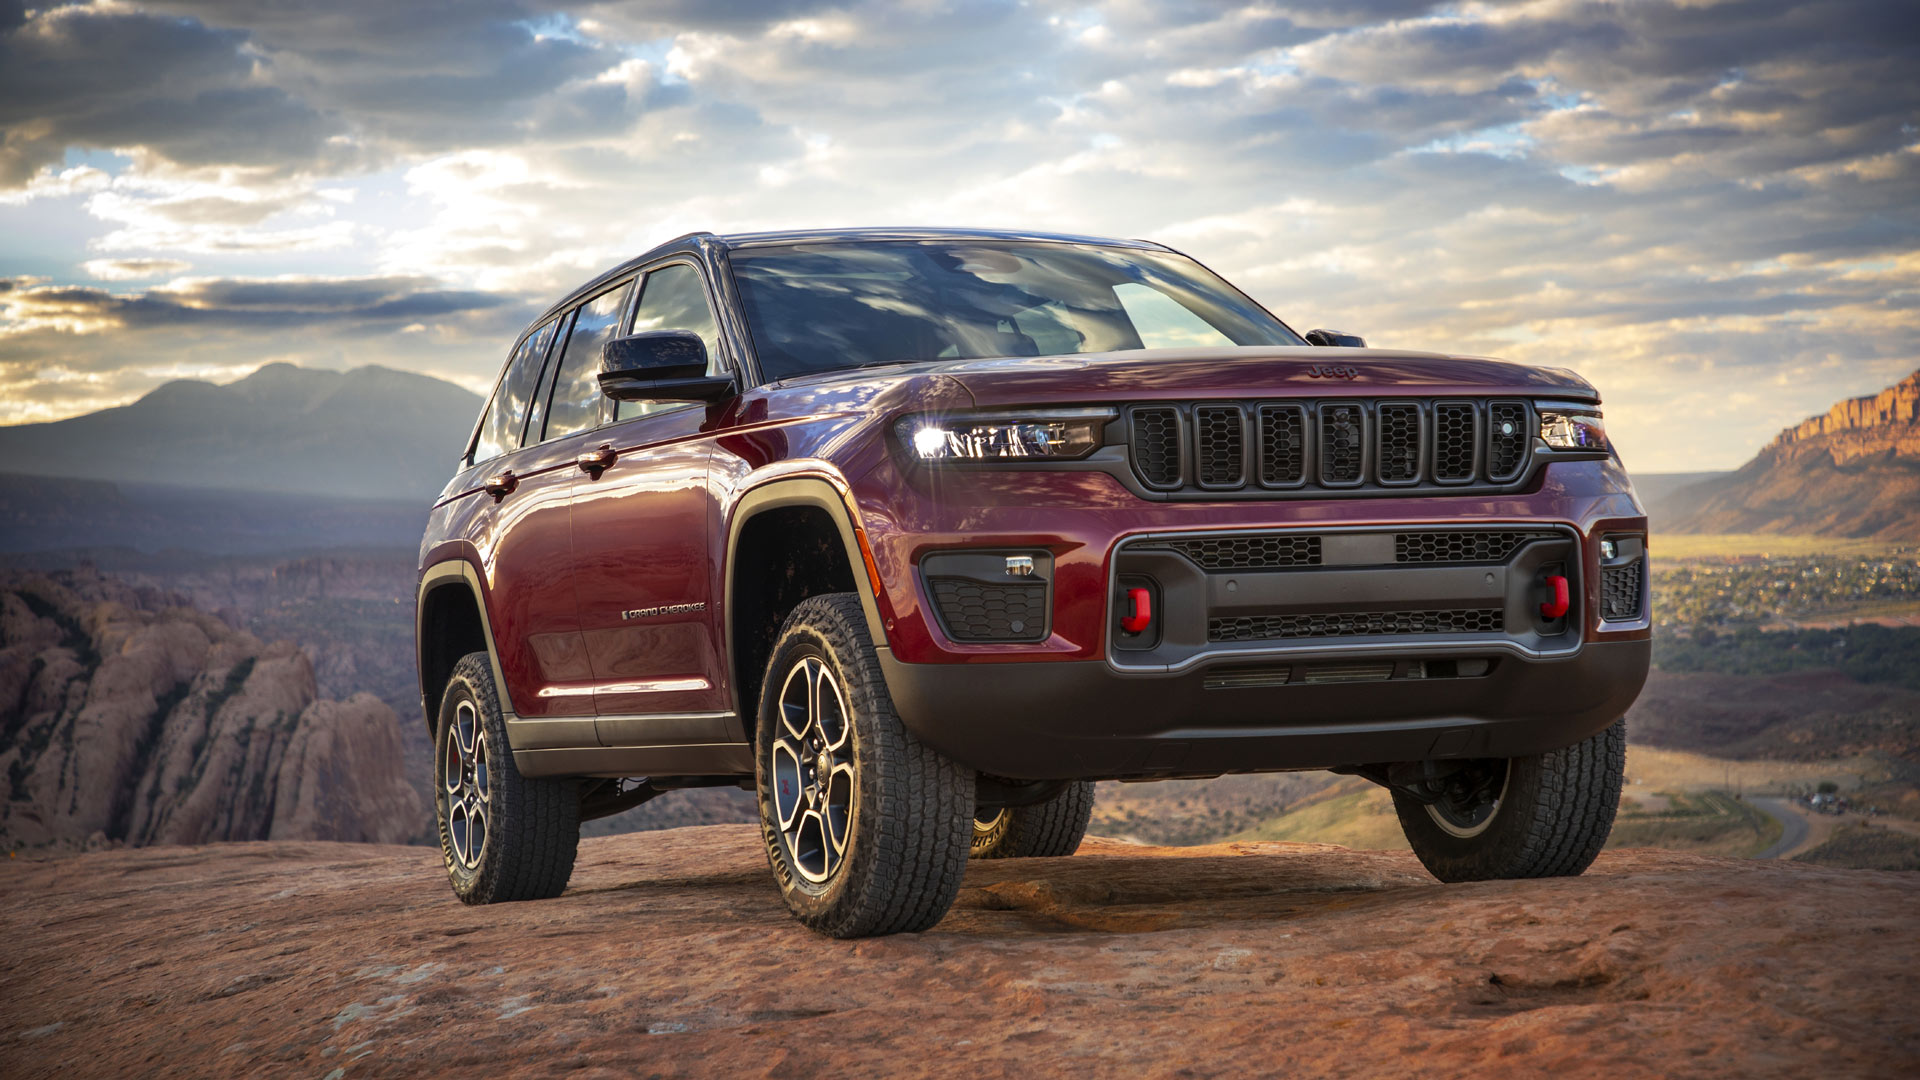 2022 Jeep Grand Cherokee Launch, Specs, Features, Photos